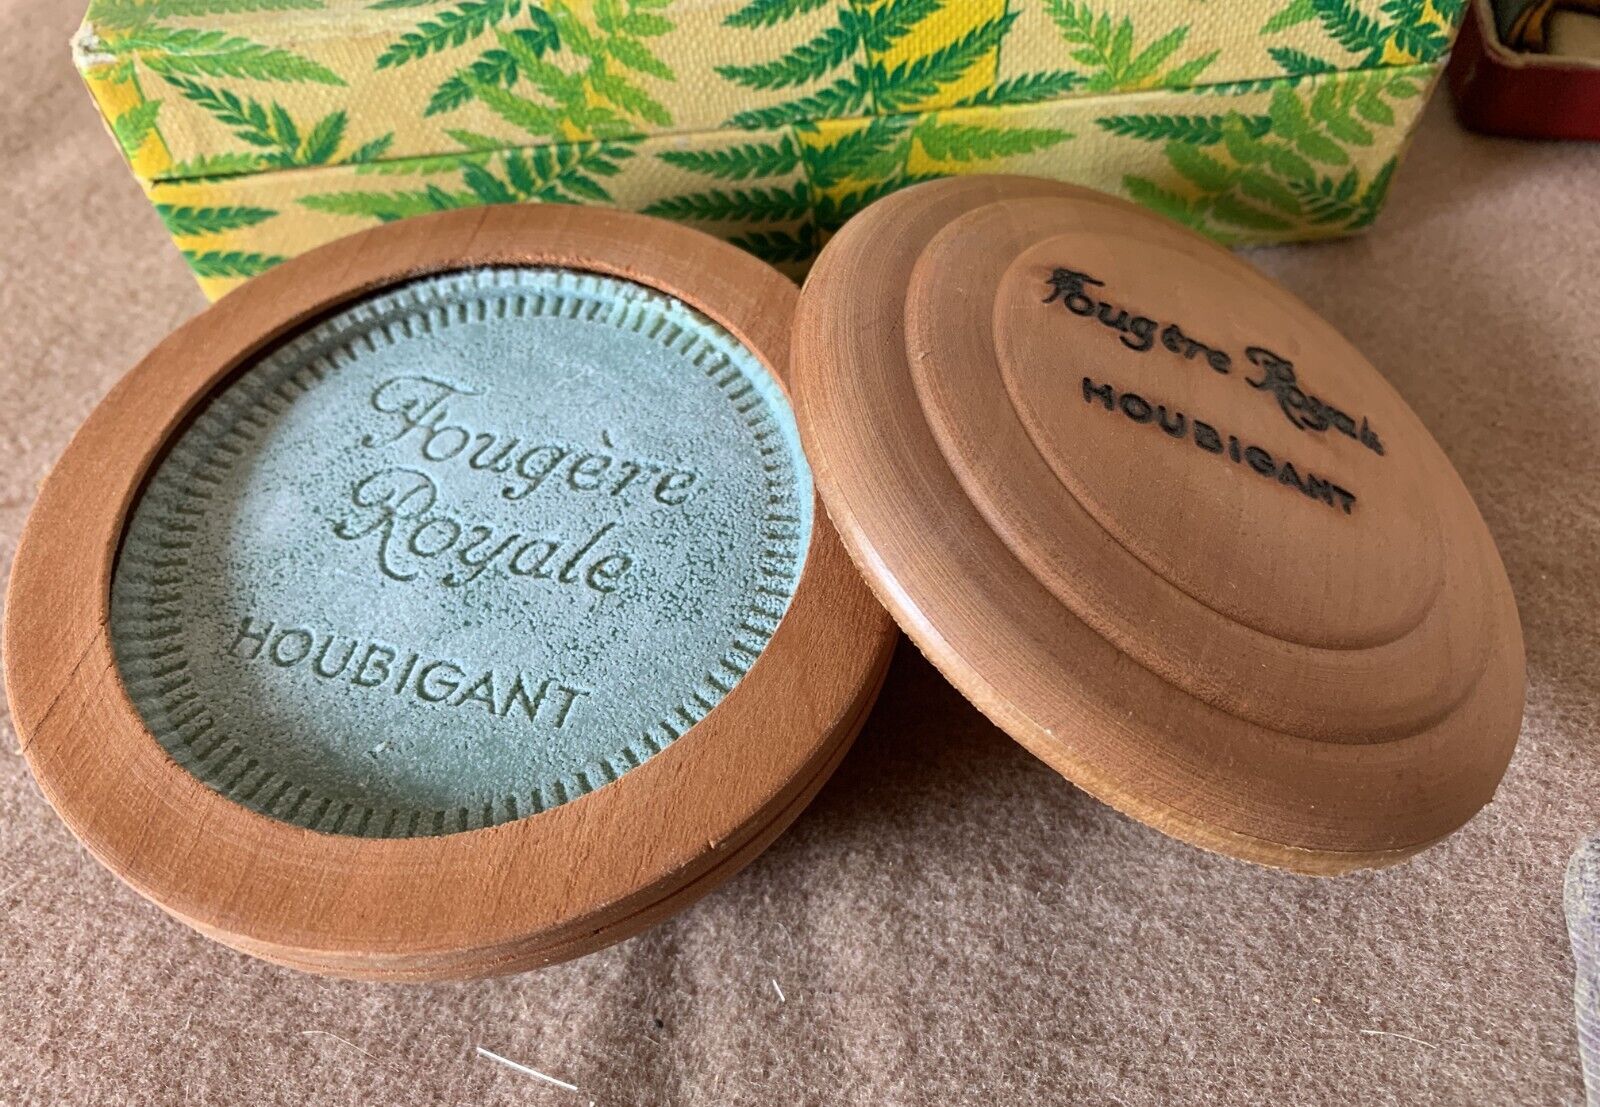 1930's Houbigant Fougere Royale Shaving Soap in Wood Container and Original Box